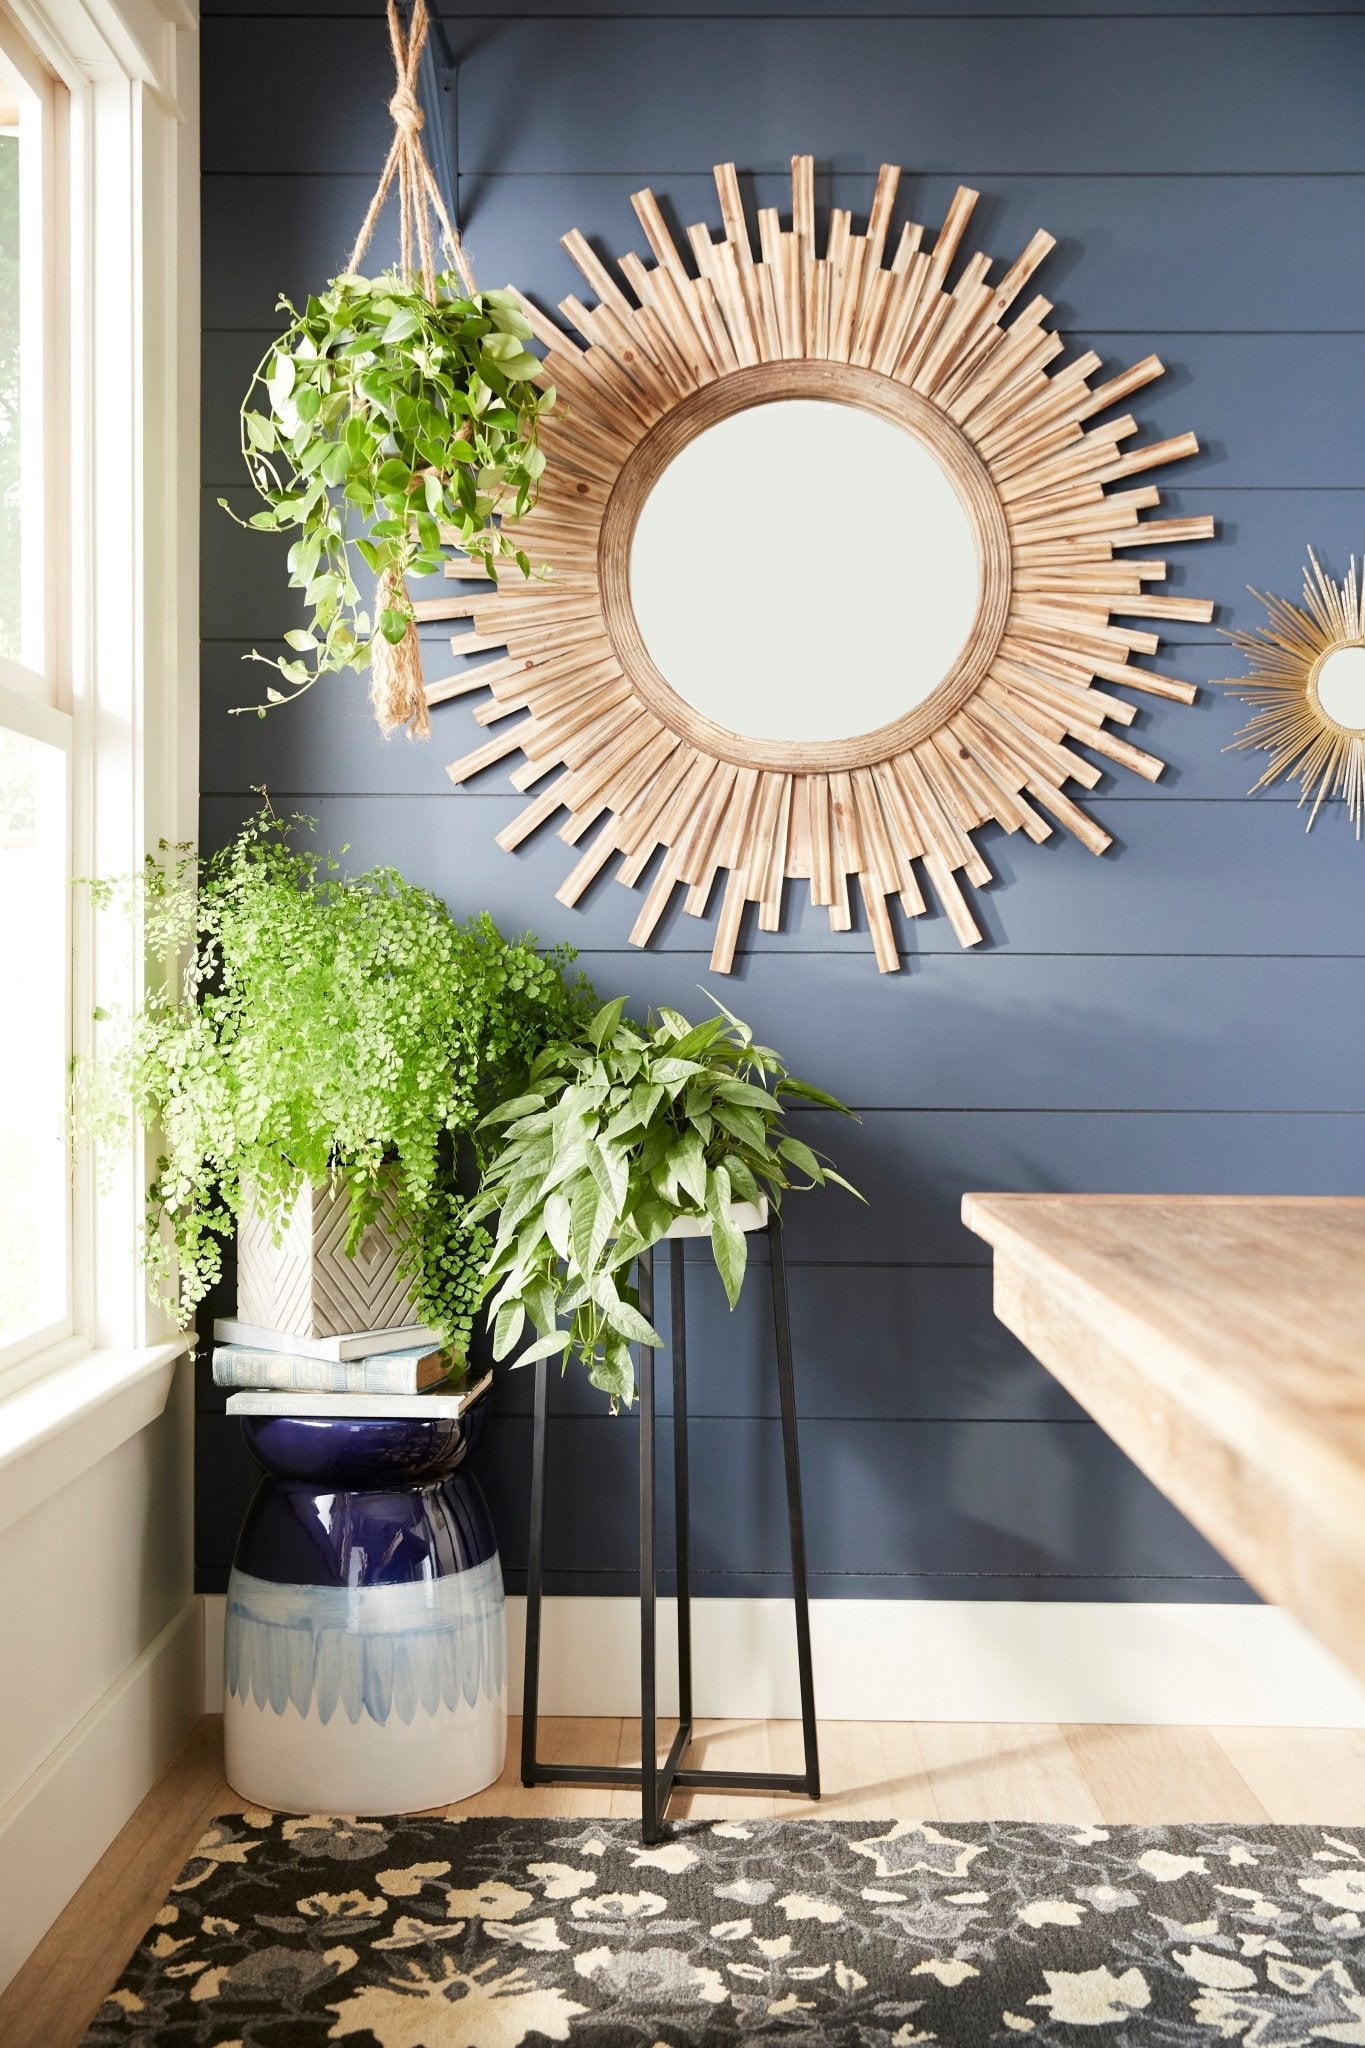 Get Inspired By the Top Color Trends of 2021 - Pier 1